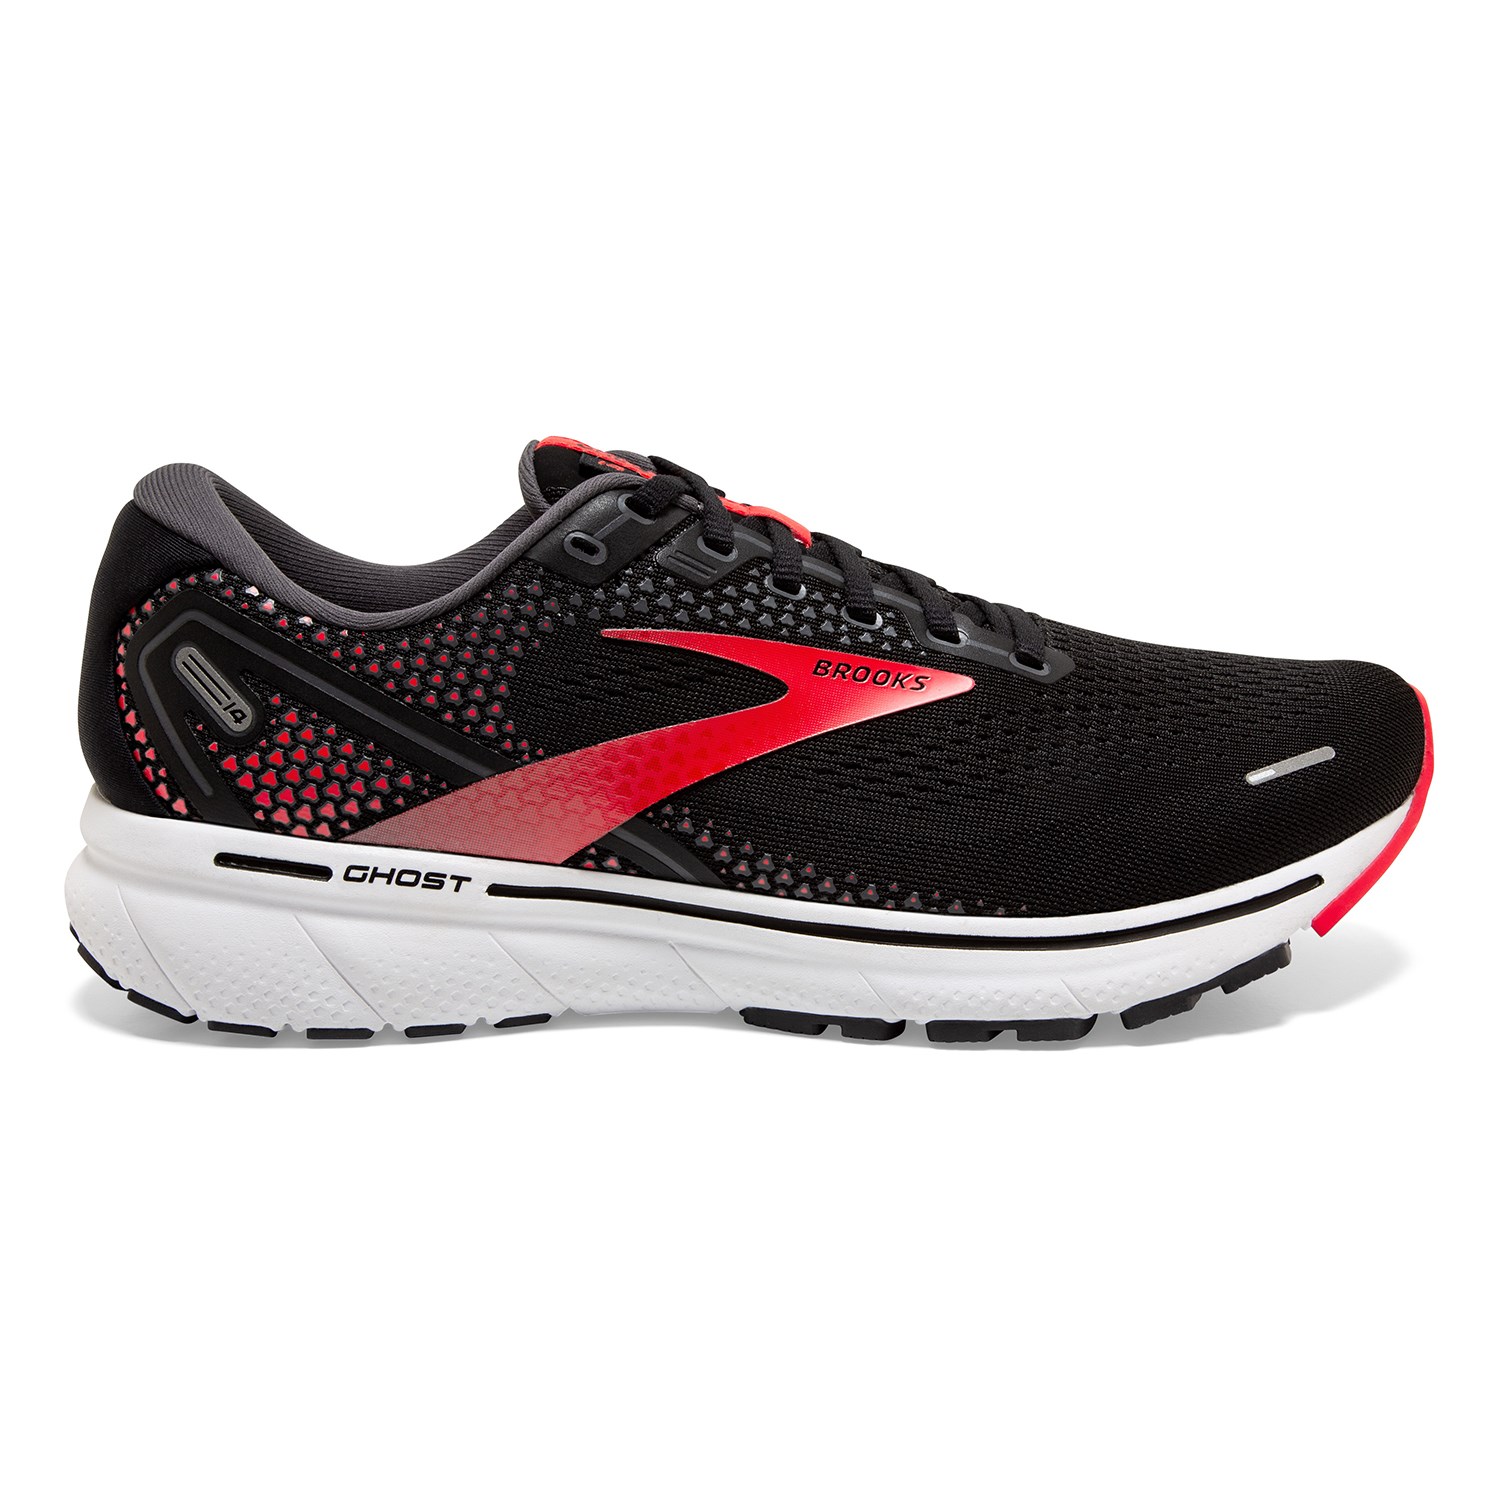 Brooks Ghost 14 - Mens Running Shoes - Black/Red/White | Sportitude